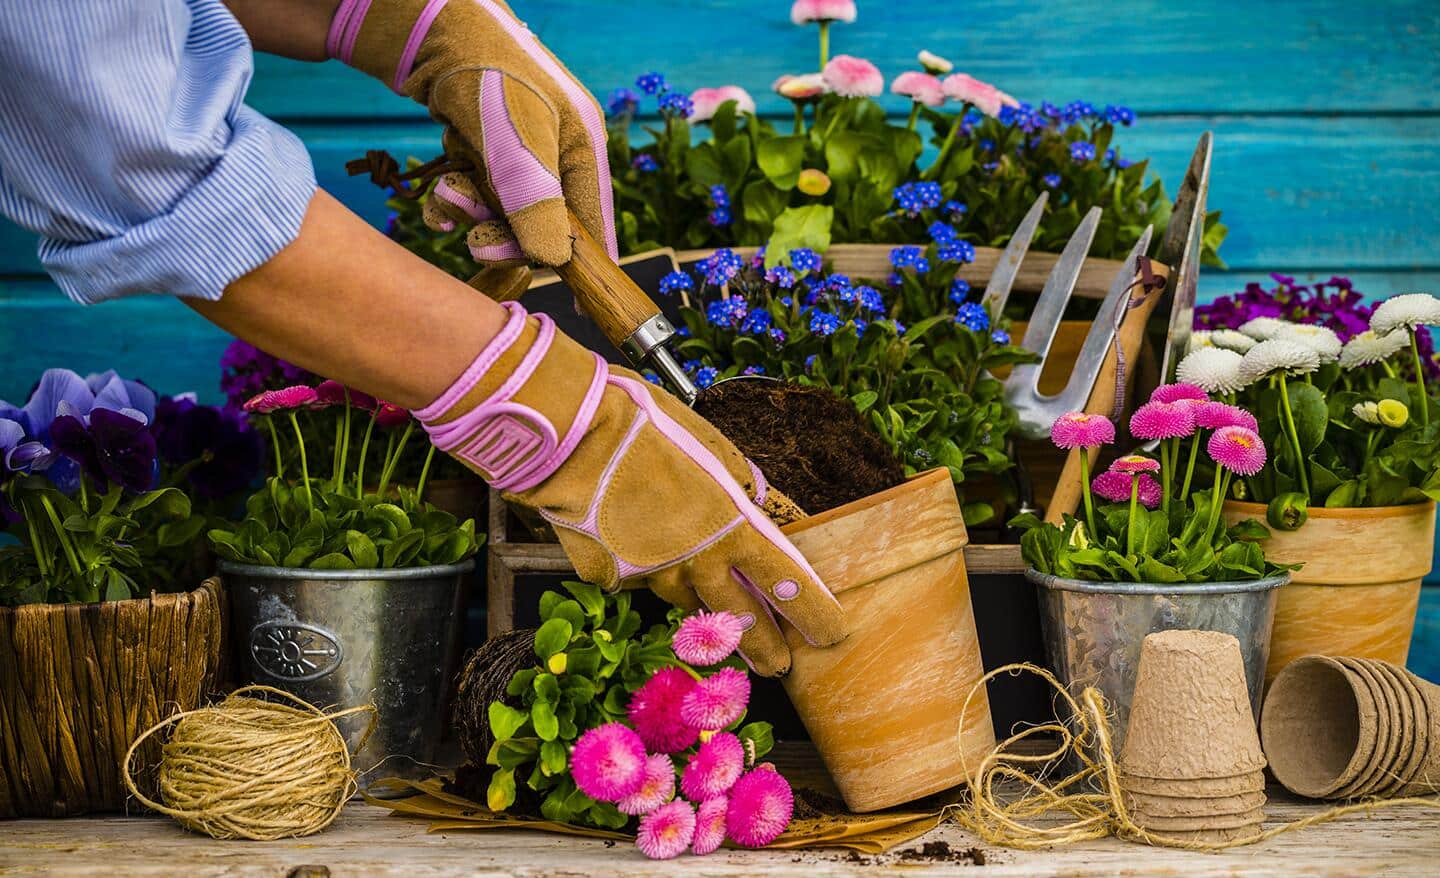 Gardener filling a flower pot with soil and plants